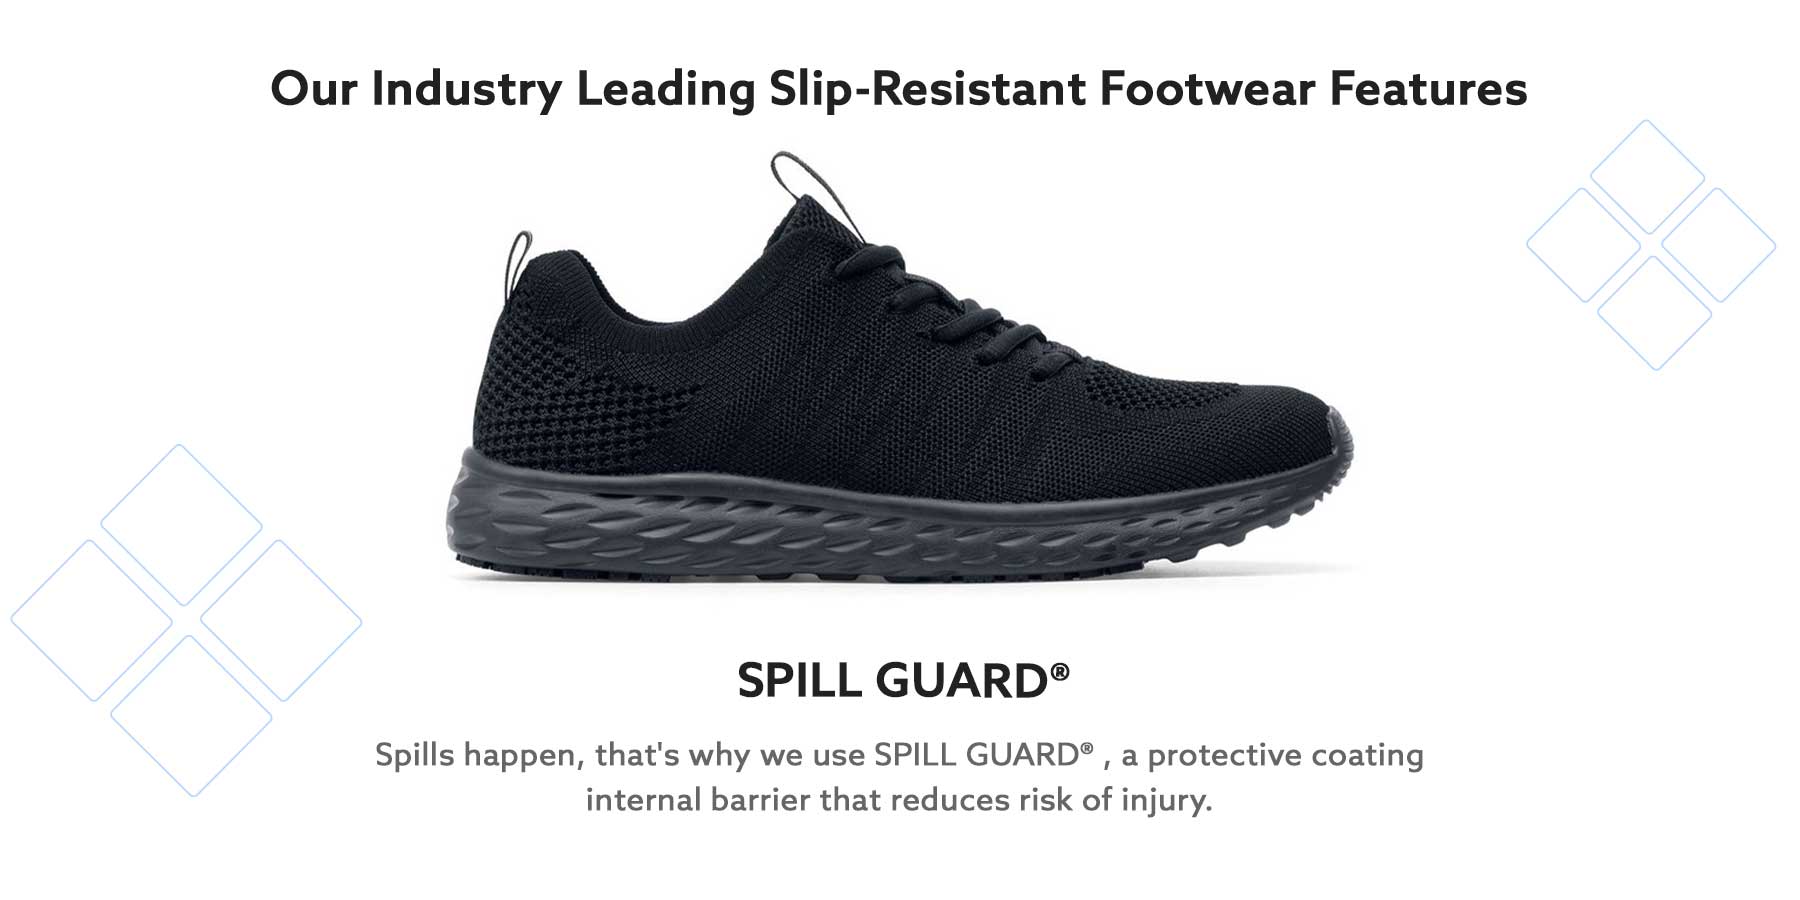 SpillGuard technology exclusively from Shoes For Crews